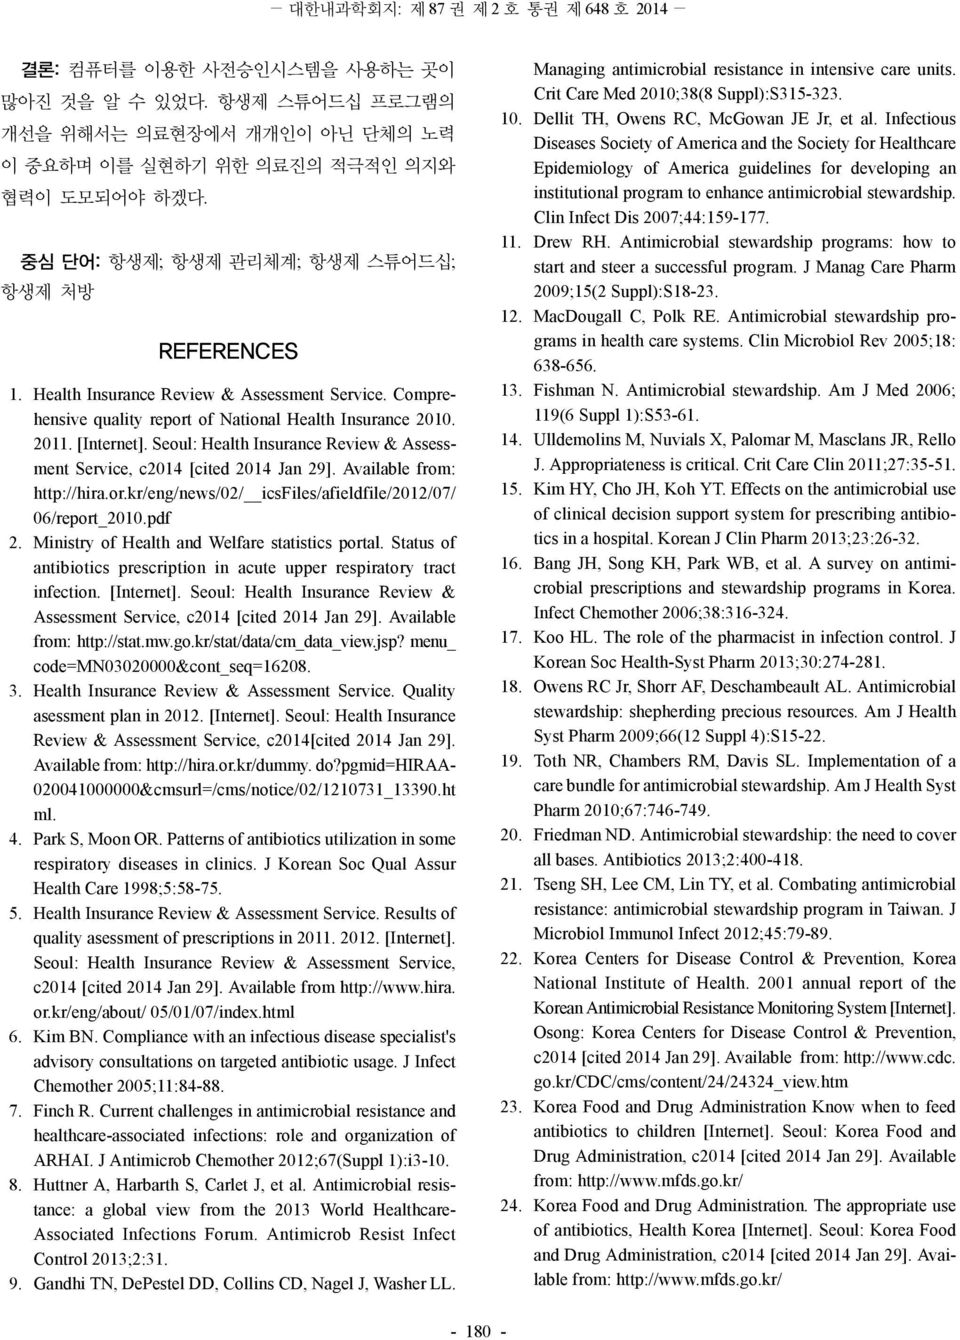 Seoul: Health Insurance Review & Assessment Service, c2014 [cited 2014 Jan 29]. Available from: http://hira.or.kr/eng/news/02/ icsfiles/afieldfile/2012/07/ 06/report_2010.pdf 2.